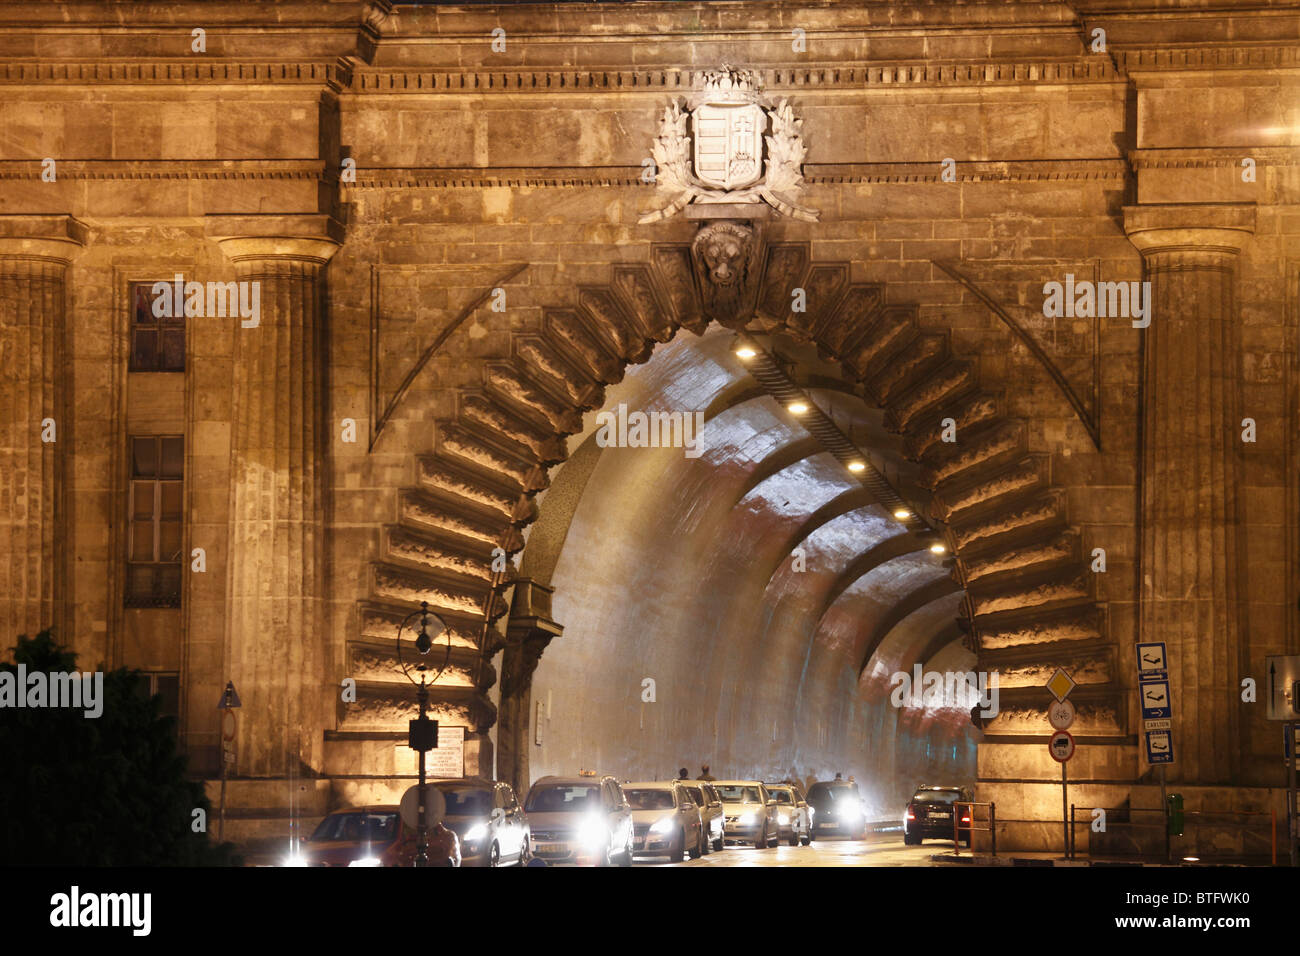 Hungary, Budapest, the Tunnel, Stock Photo